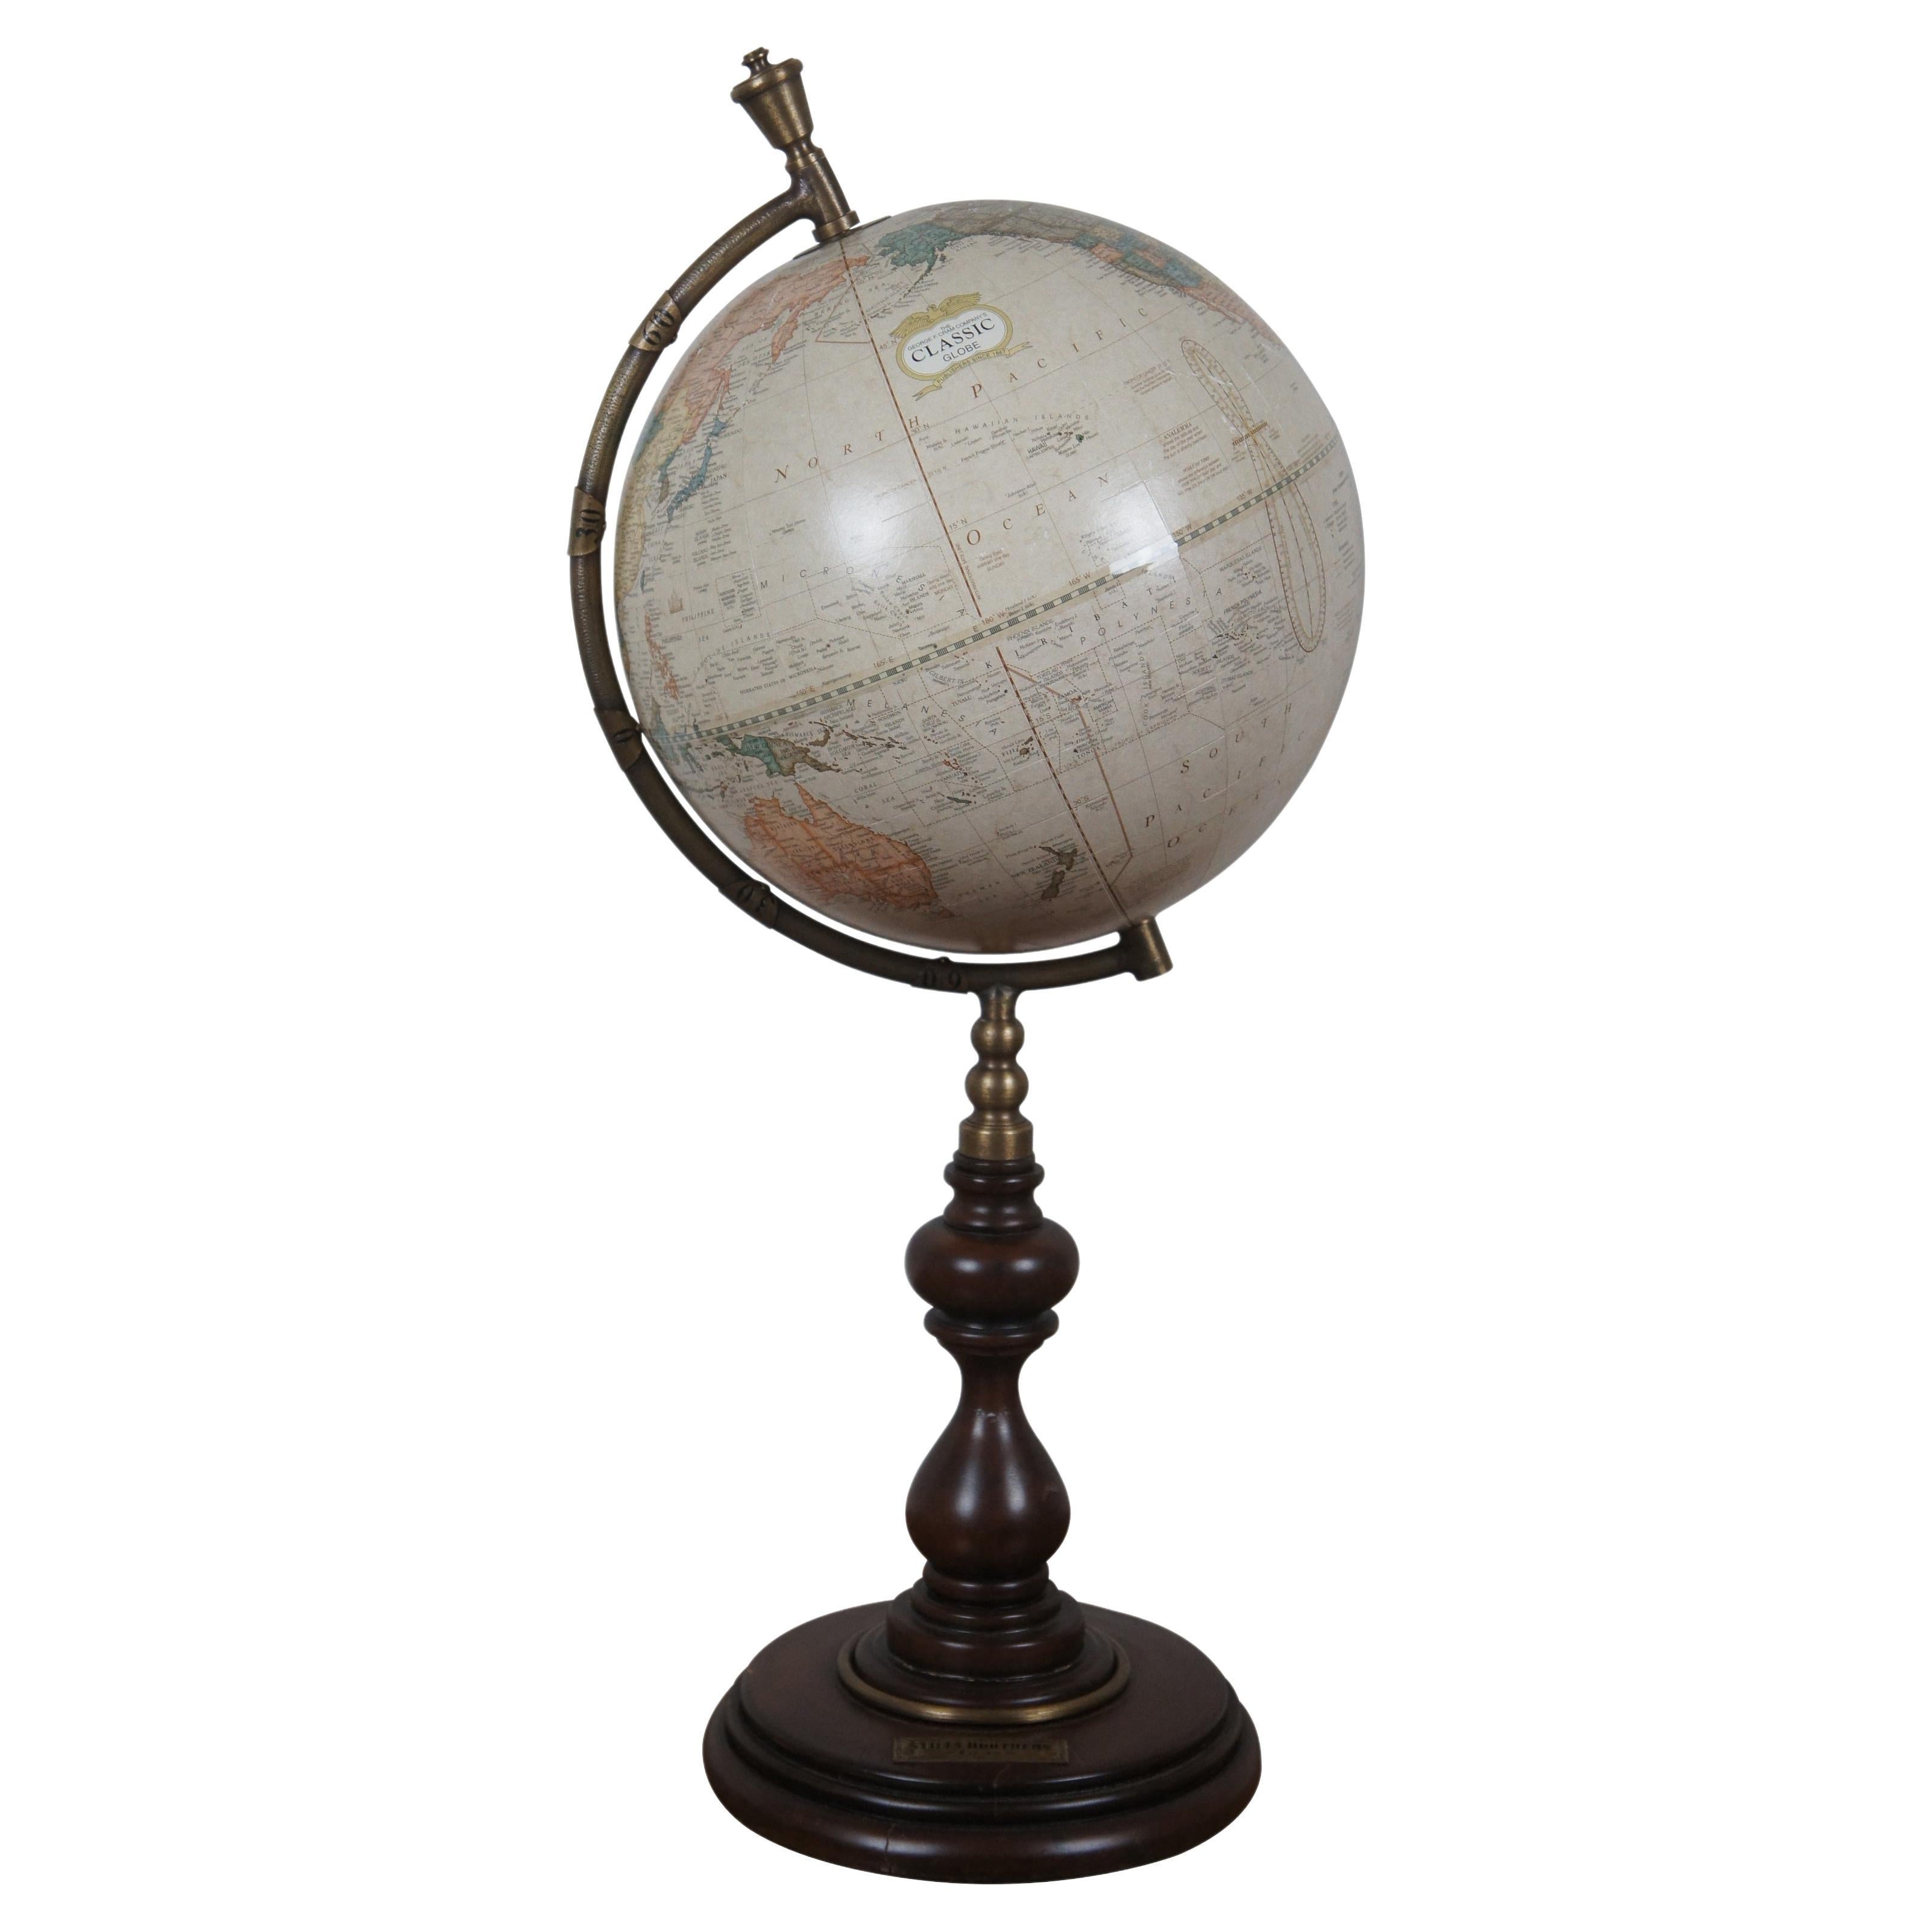 Stiles Brothers George F Cram Co Classic Desktop Globe on Wood Stand 10" For Sale